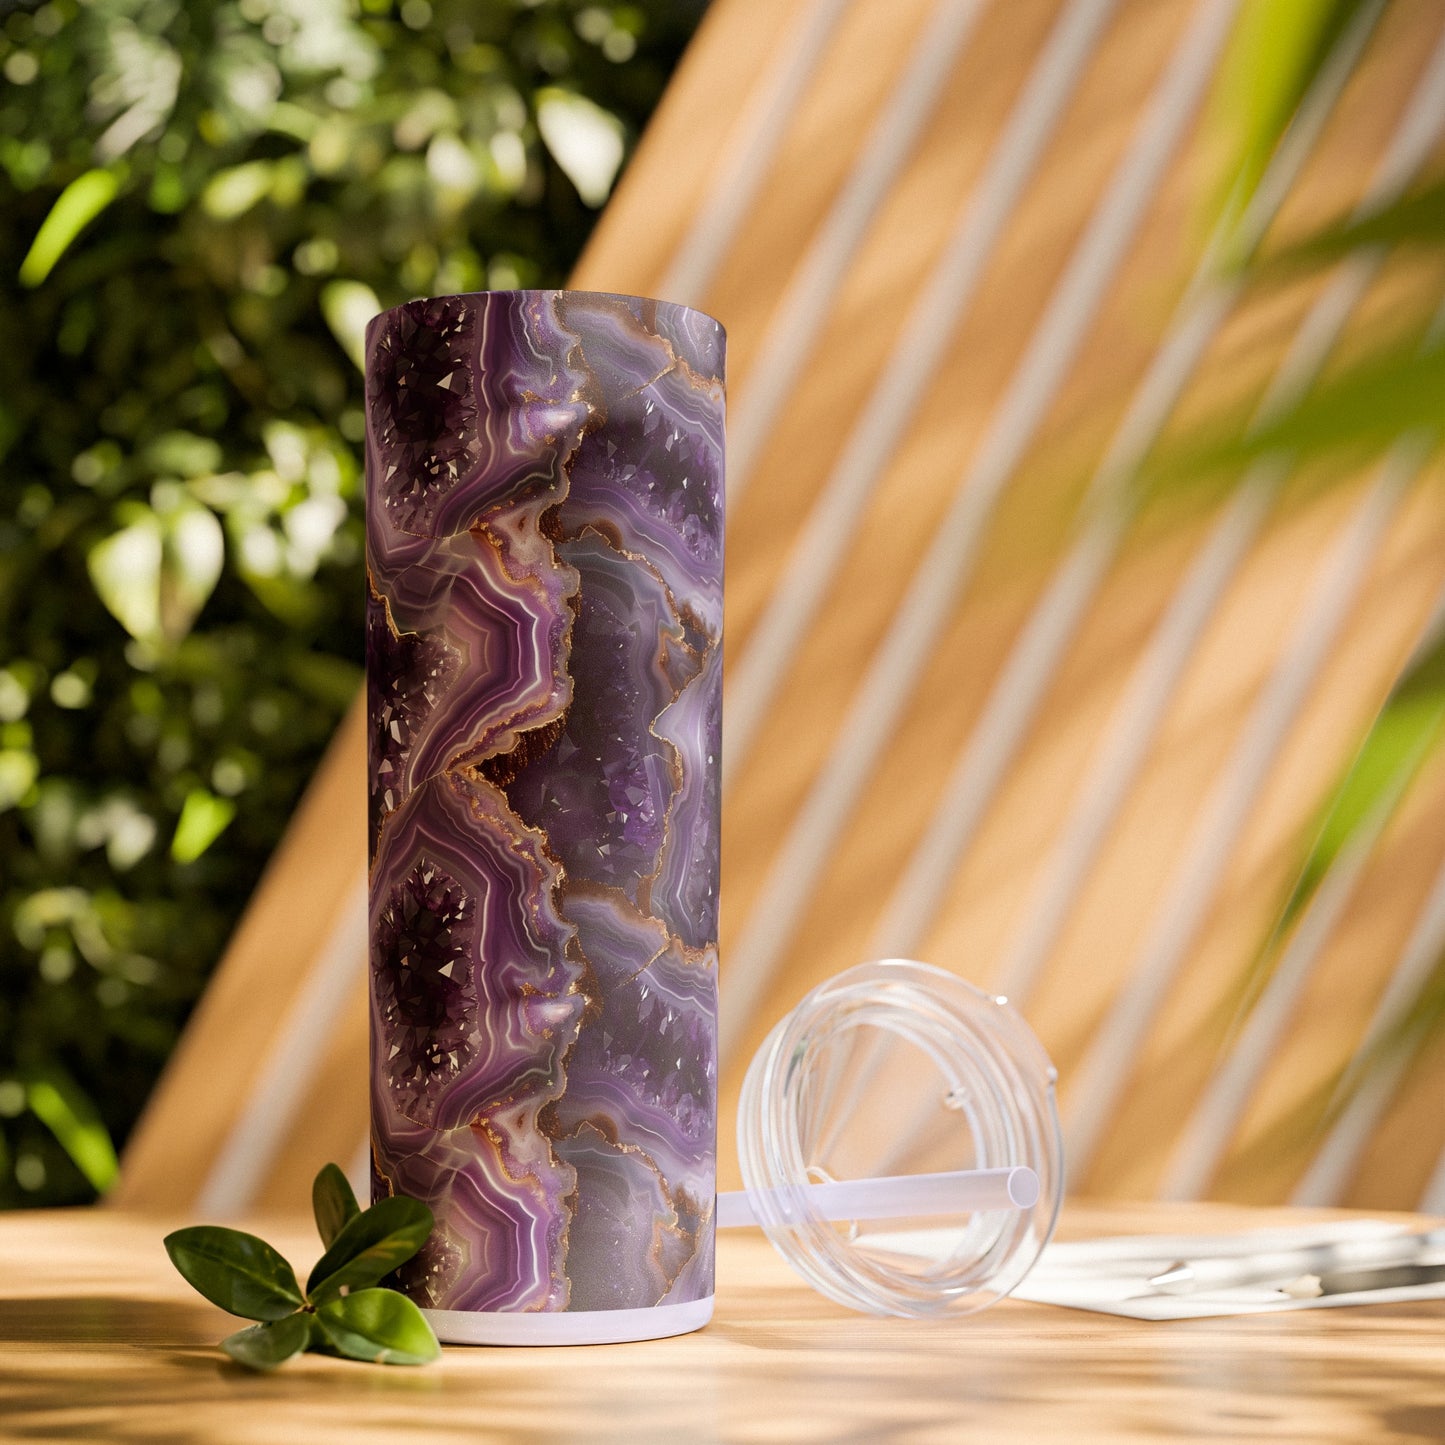 Stainless Steel Tumbler with Lid & Straw, 20 oz, Purple Amethyst Geode  - Double-walled, Keeps Drinks Hot or Cold